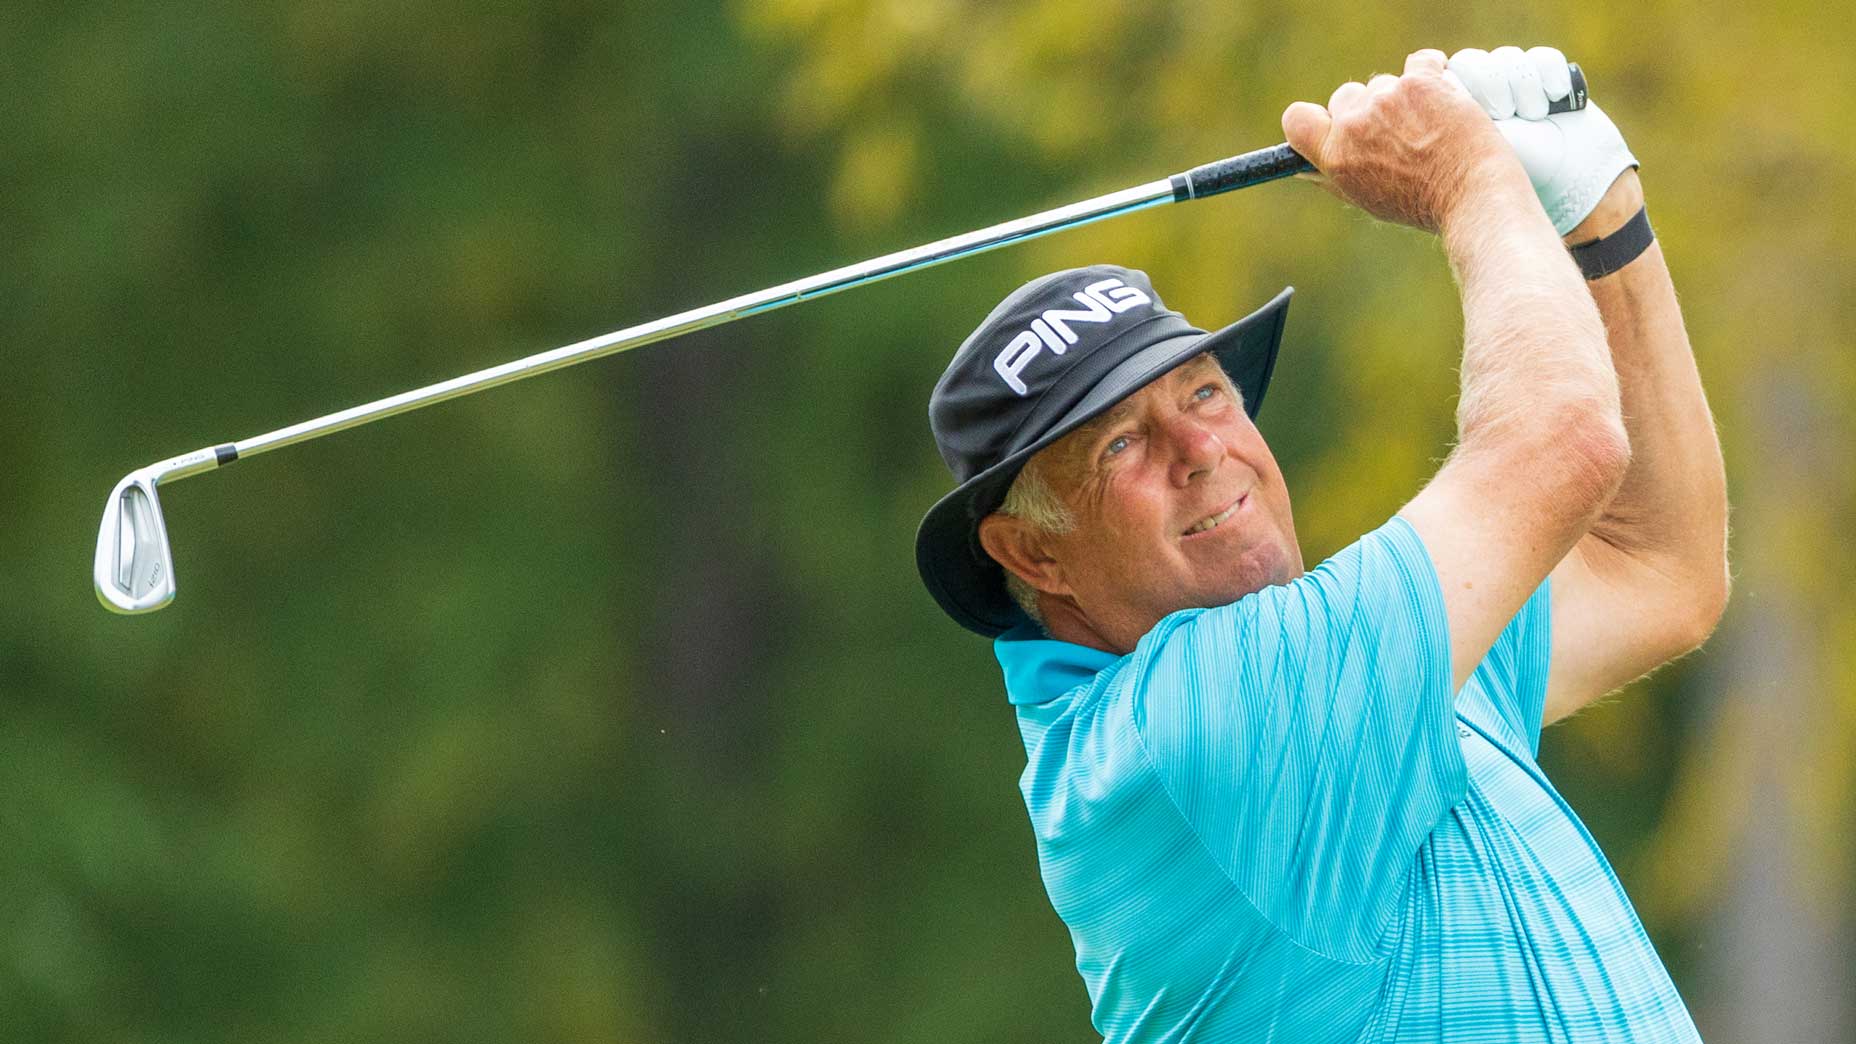 metal køretøj statisk Want to play good golf as you get older? This 58-year-old pro has a plan